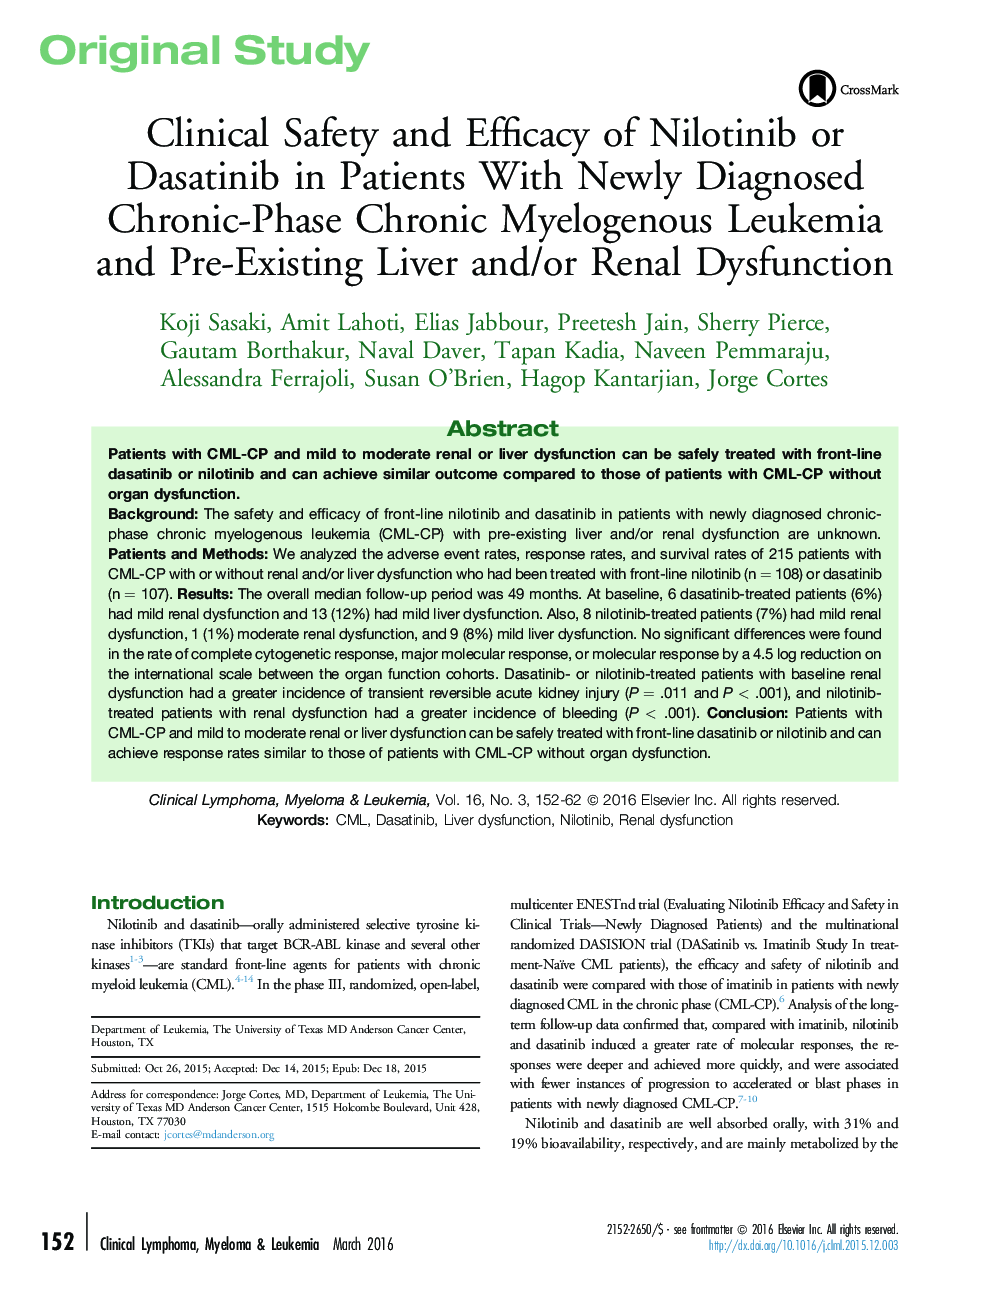 Clinical Safety and Efficacy of Nilotinib or Dasatinib in Patients With Newly Diagnosed Chronic-Phase Chronic Myelogenous Leukemia and Pre-Existing Liver and/or Renal Dysfunction